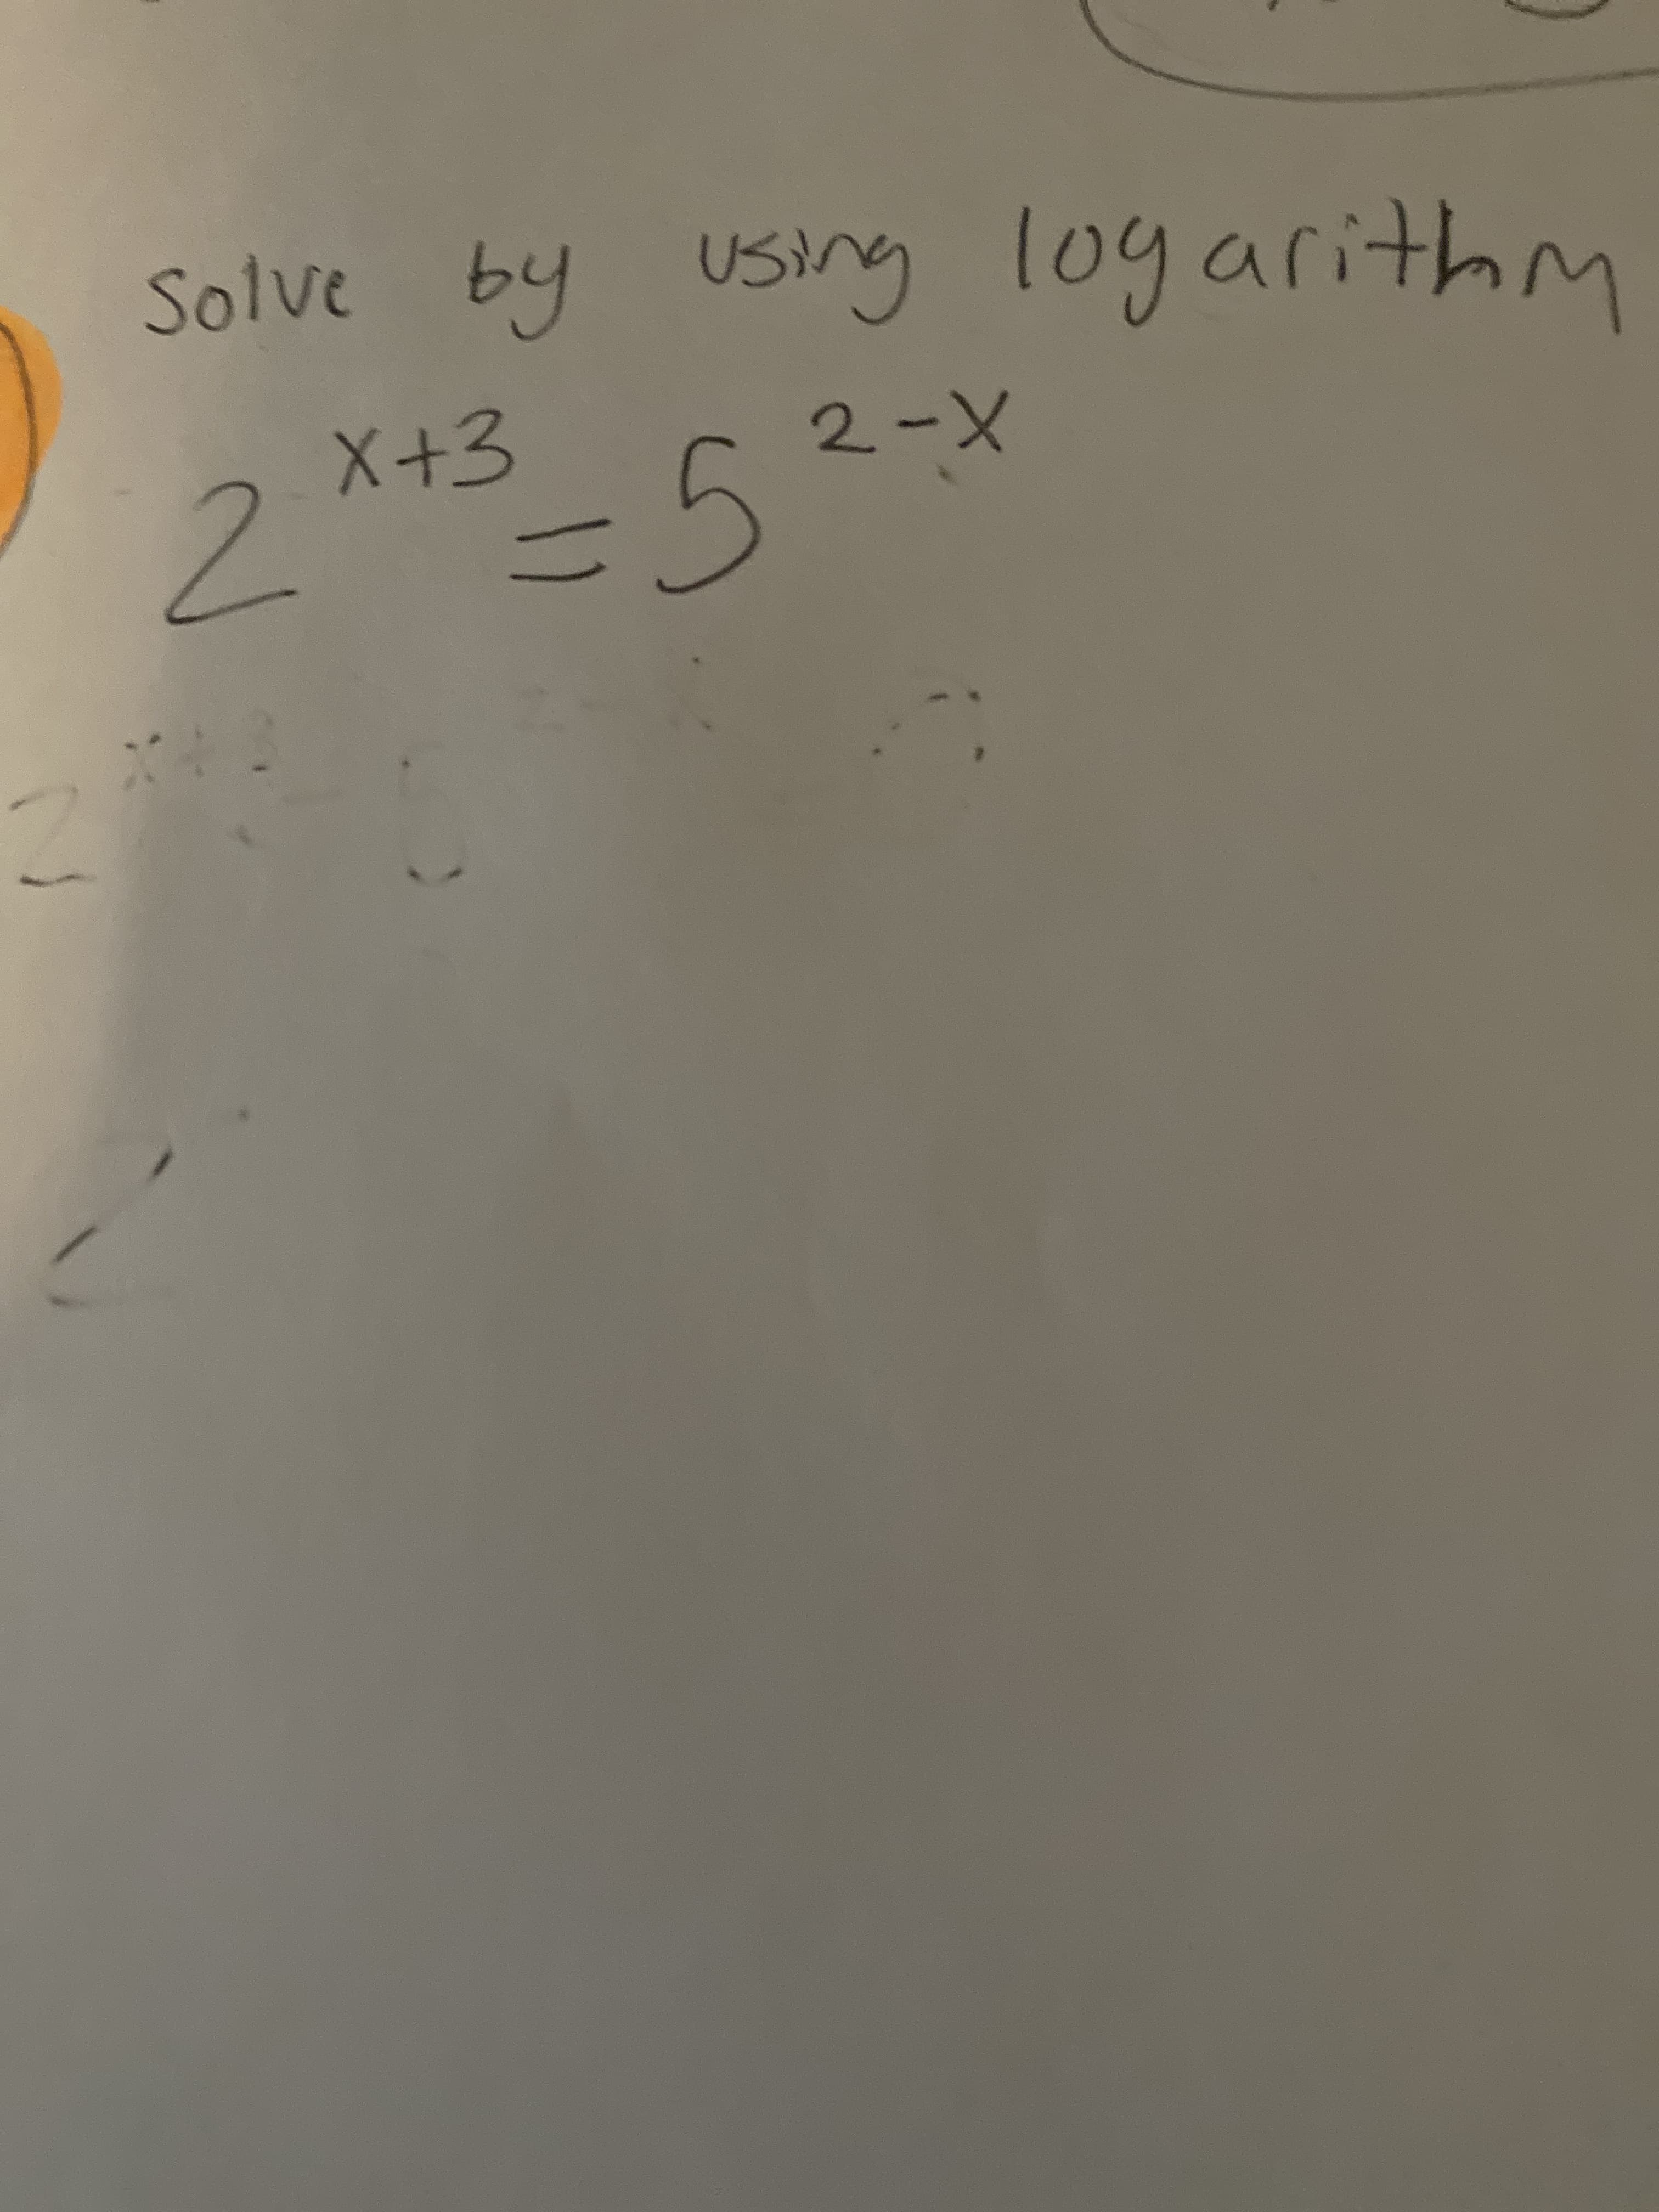 Solve by using logarithm
X+3
2-X
2.
13D
